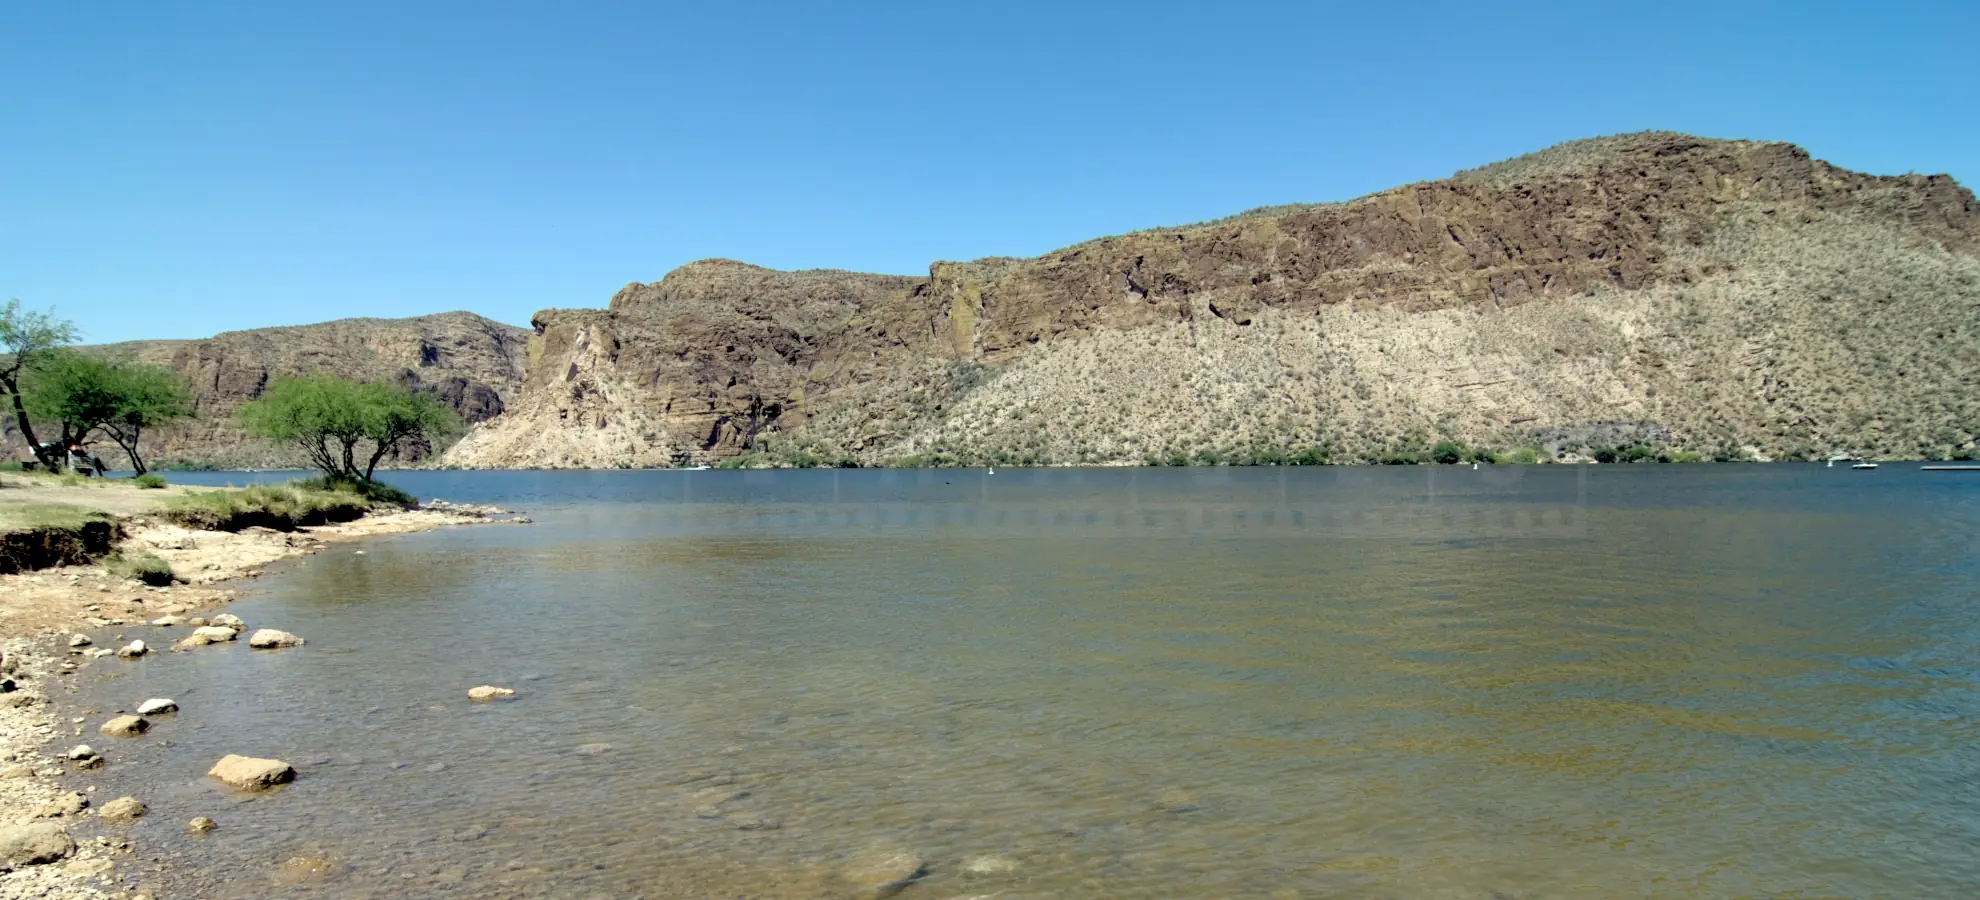 Shore of the Salt River Reservoir with mesquite trees